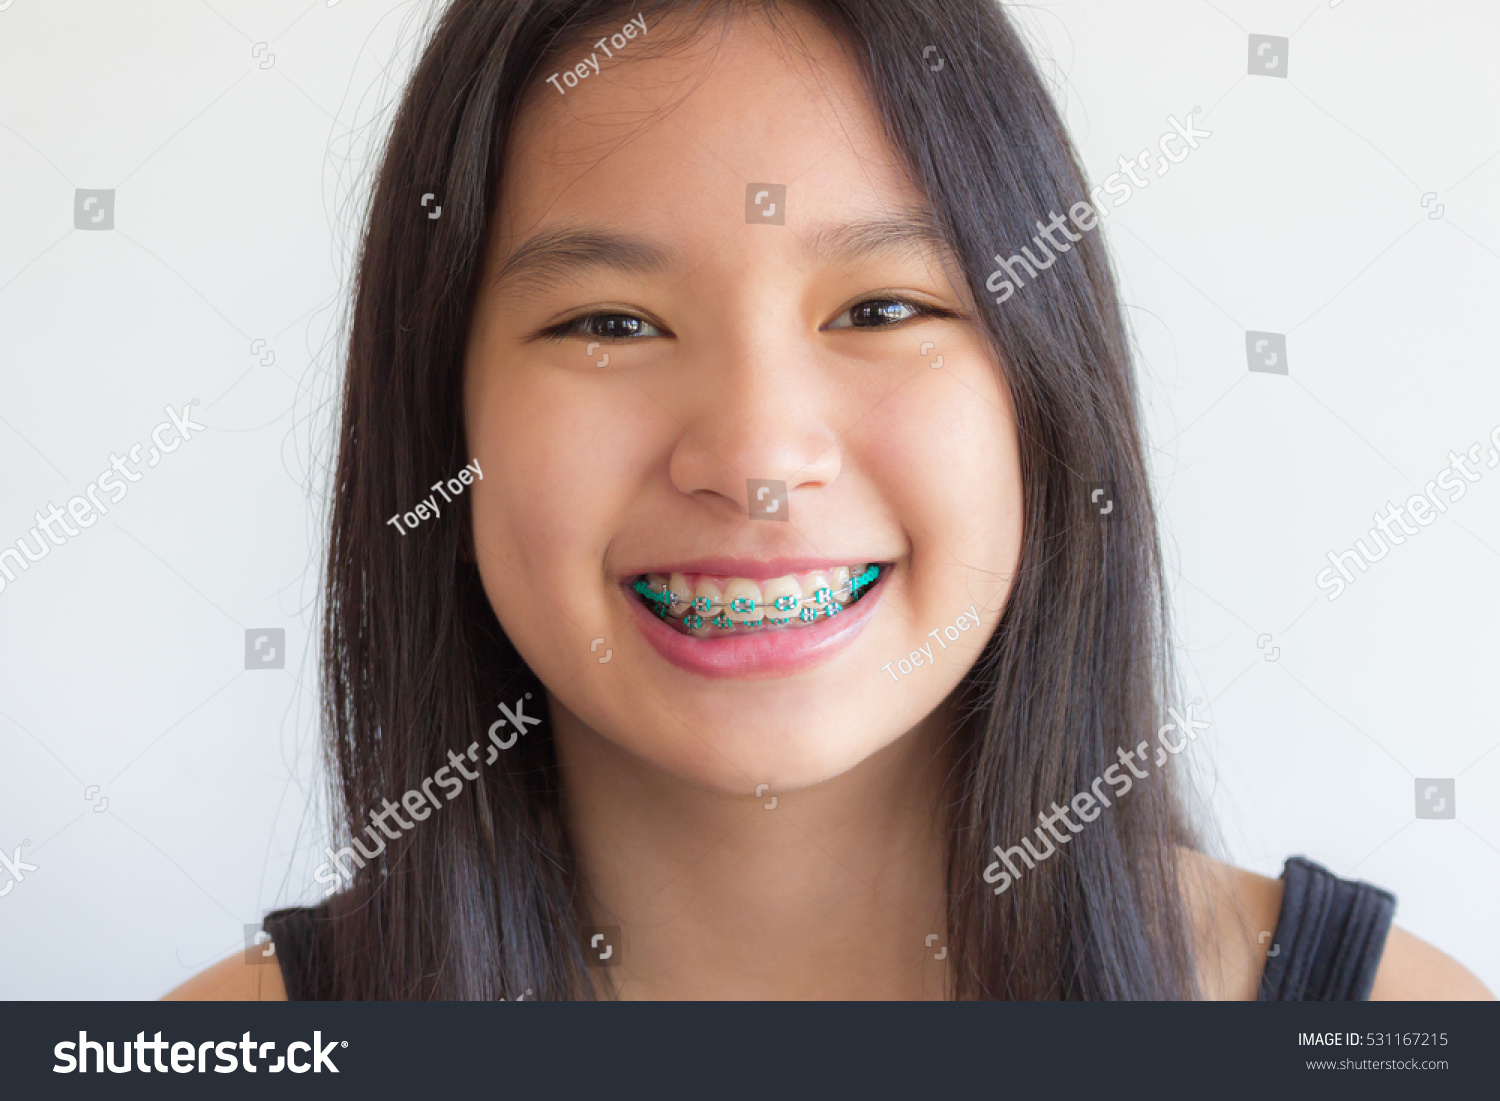 Girls With Braces Telegraph